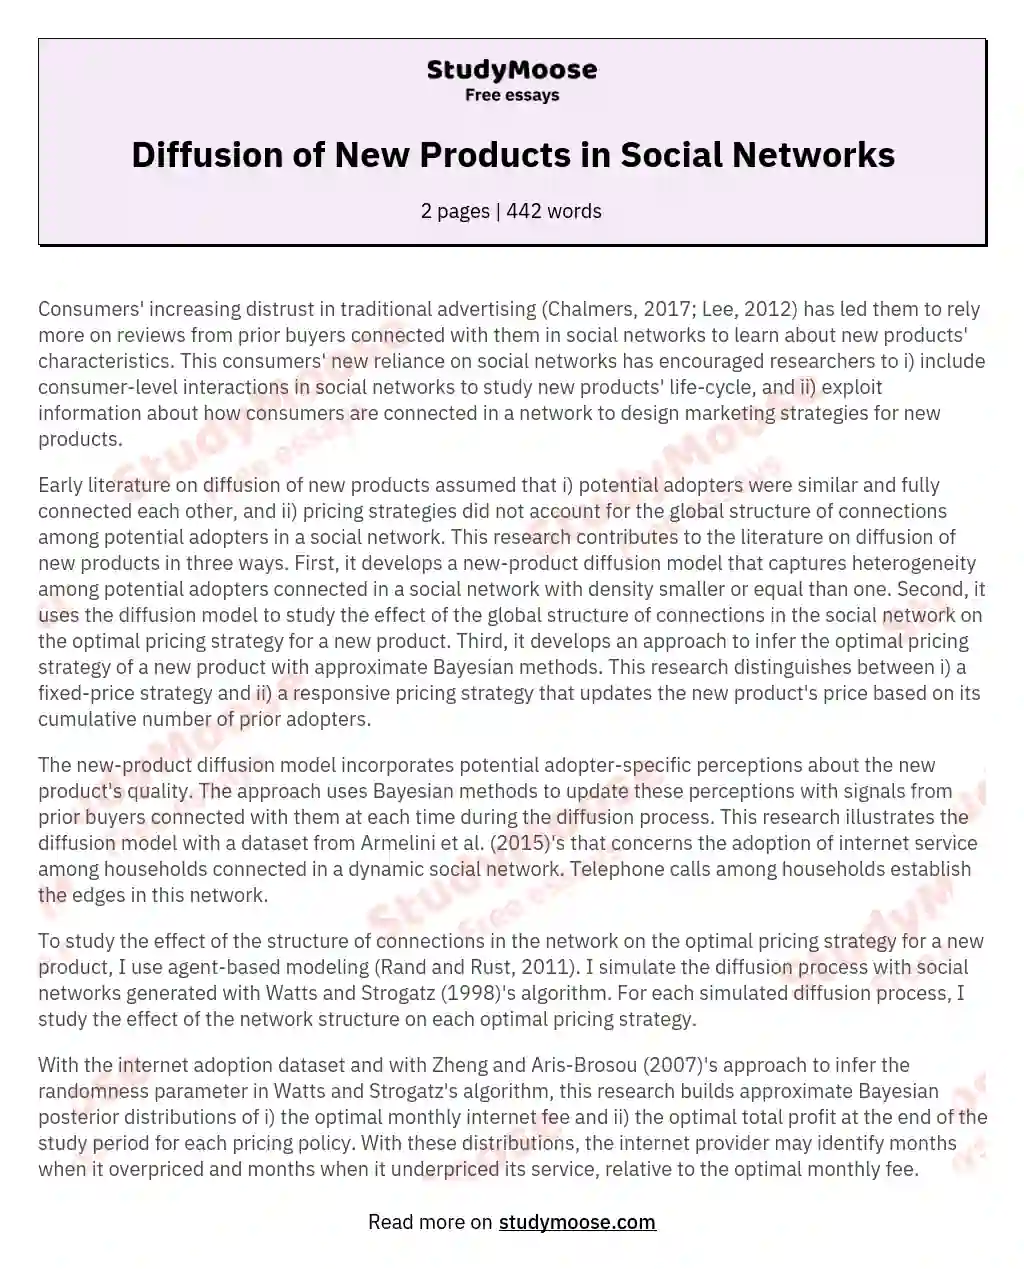 Diffusion of New Products in Social Networks essay